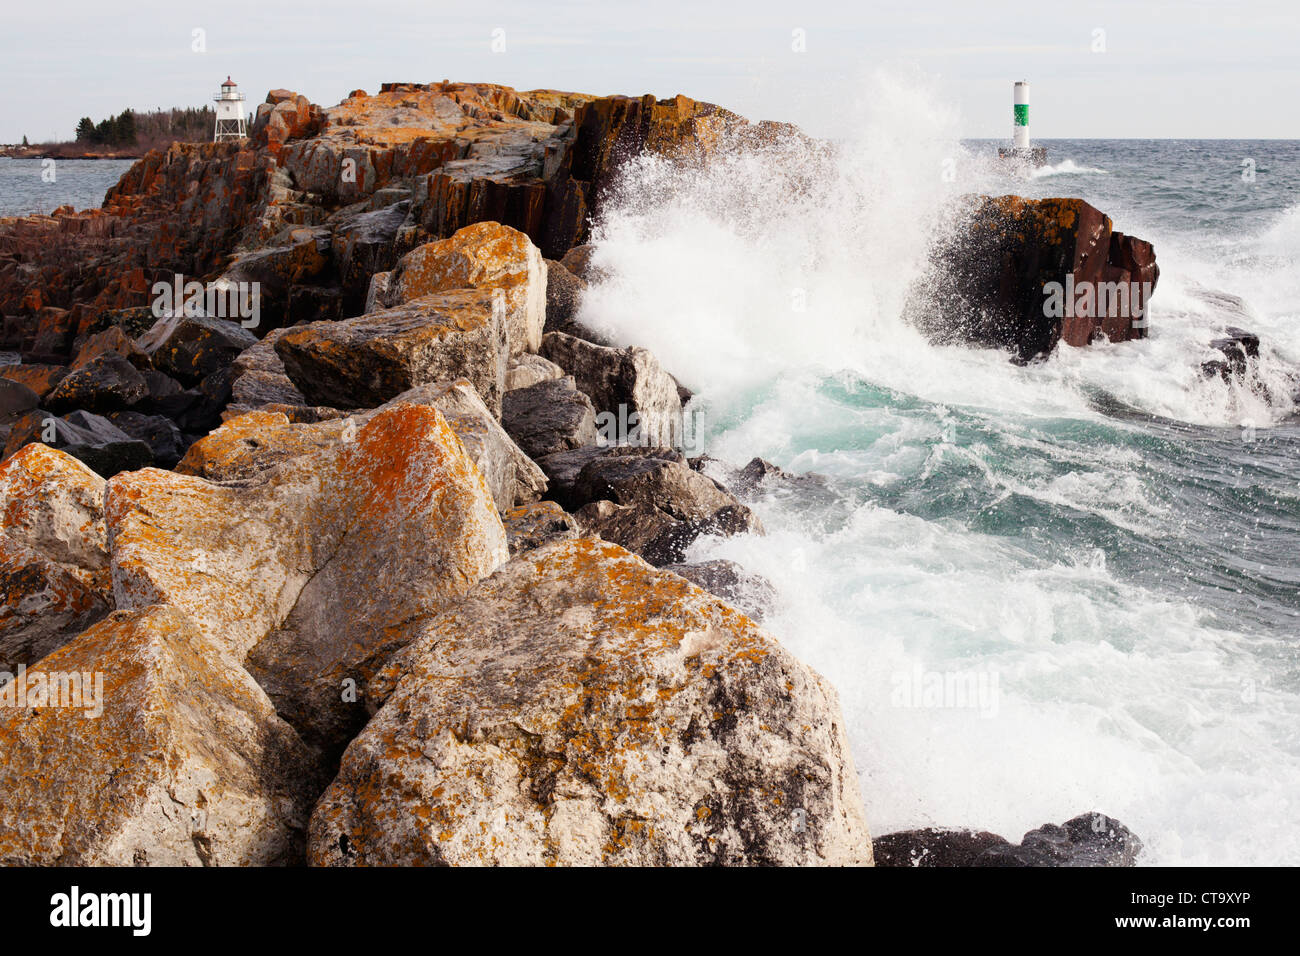 Breakwater at Grand Marais, Minnesota on Lake Superior with some rough waves. Stock Photo